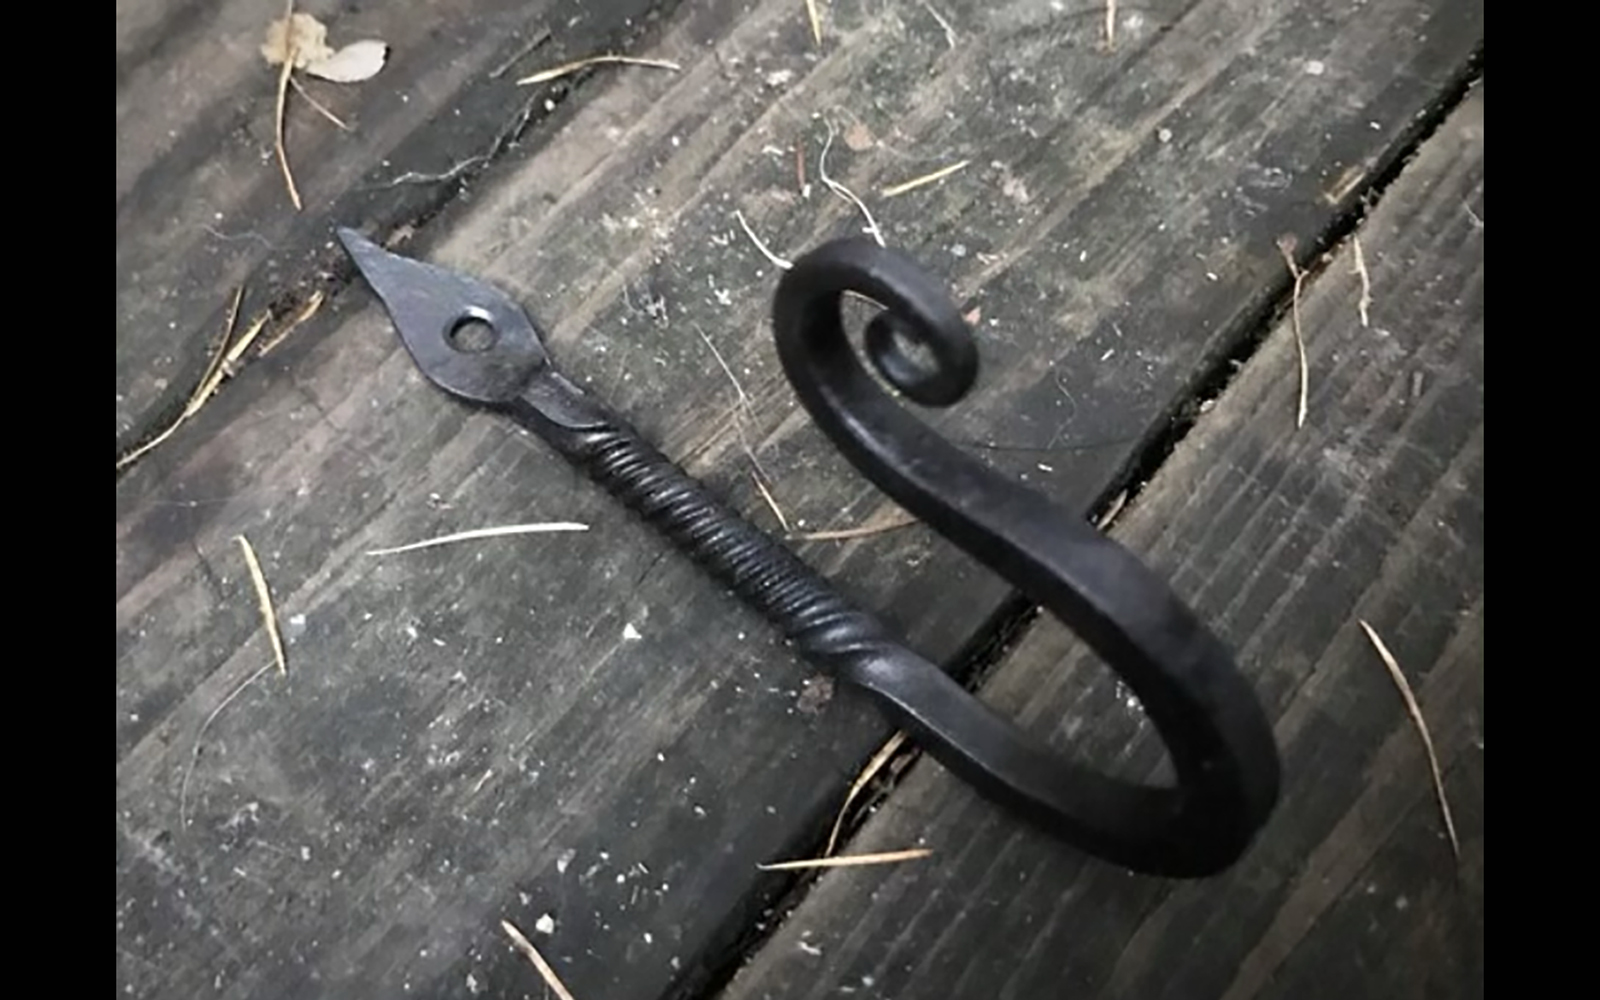 example of a hook forged during the workshop